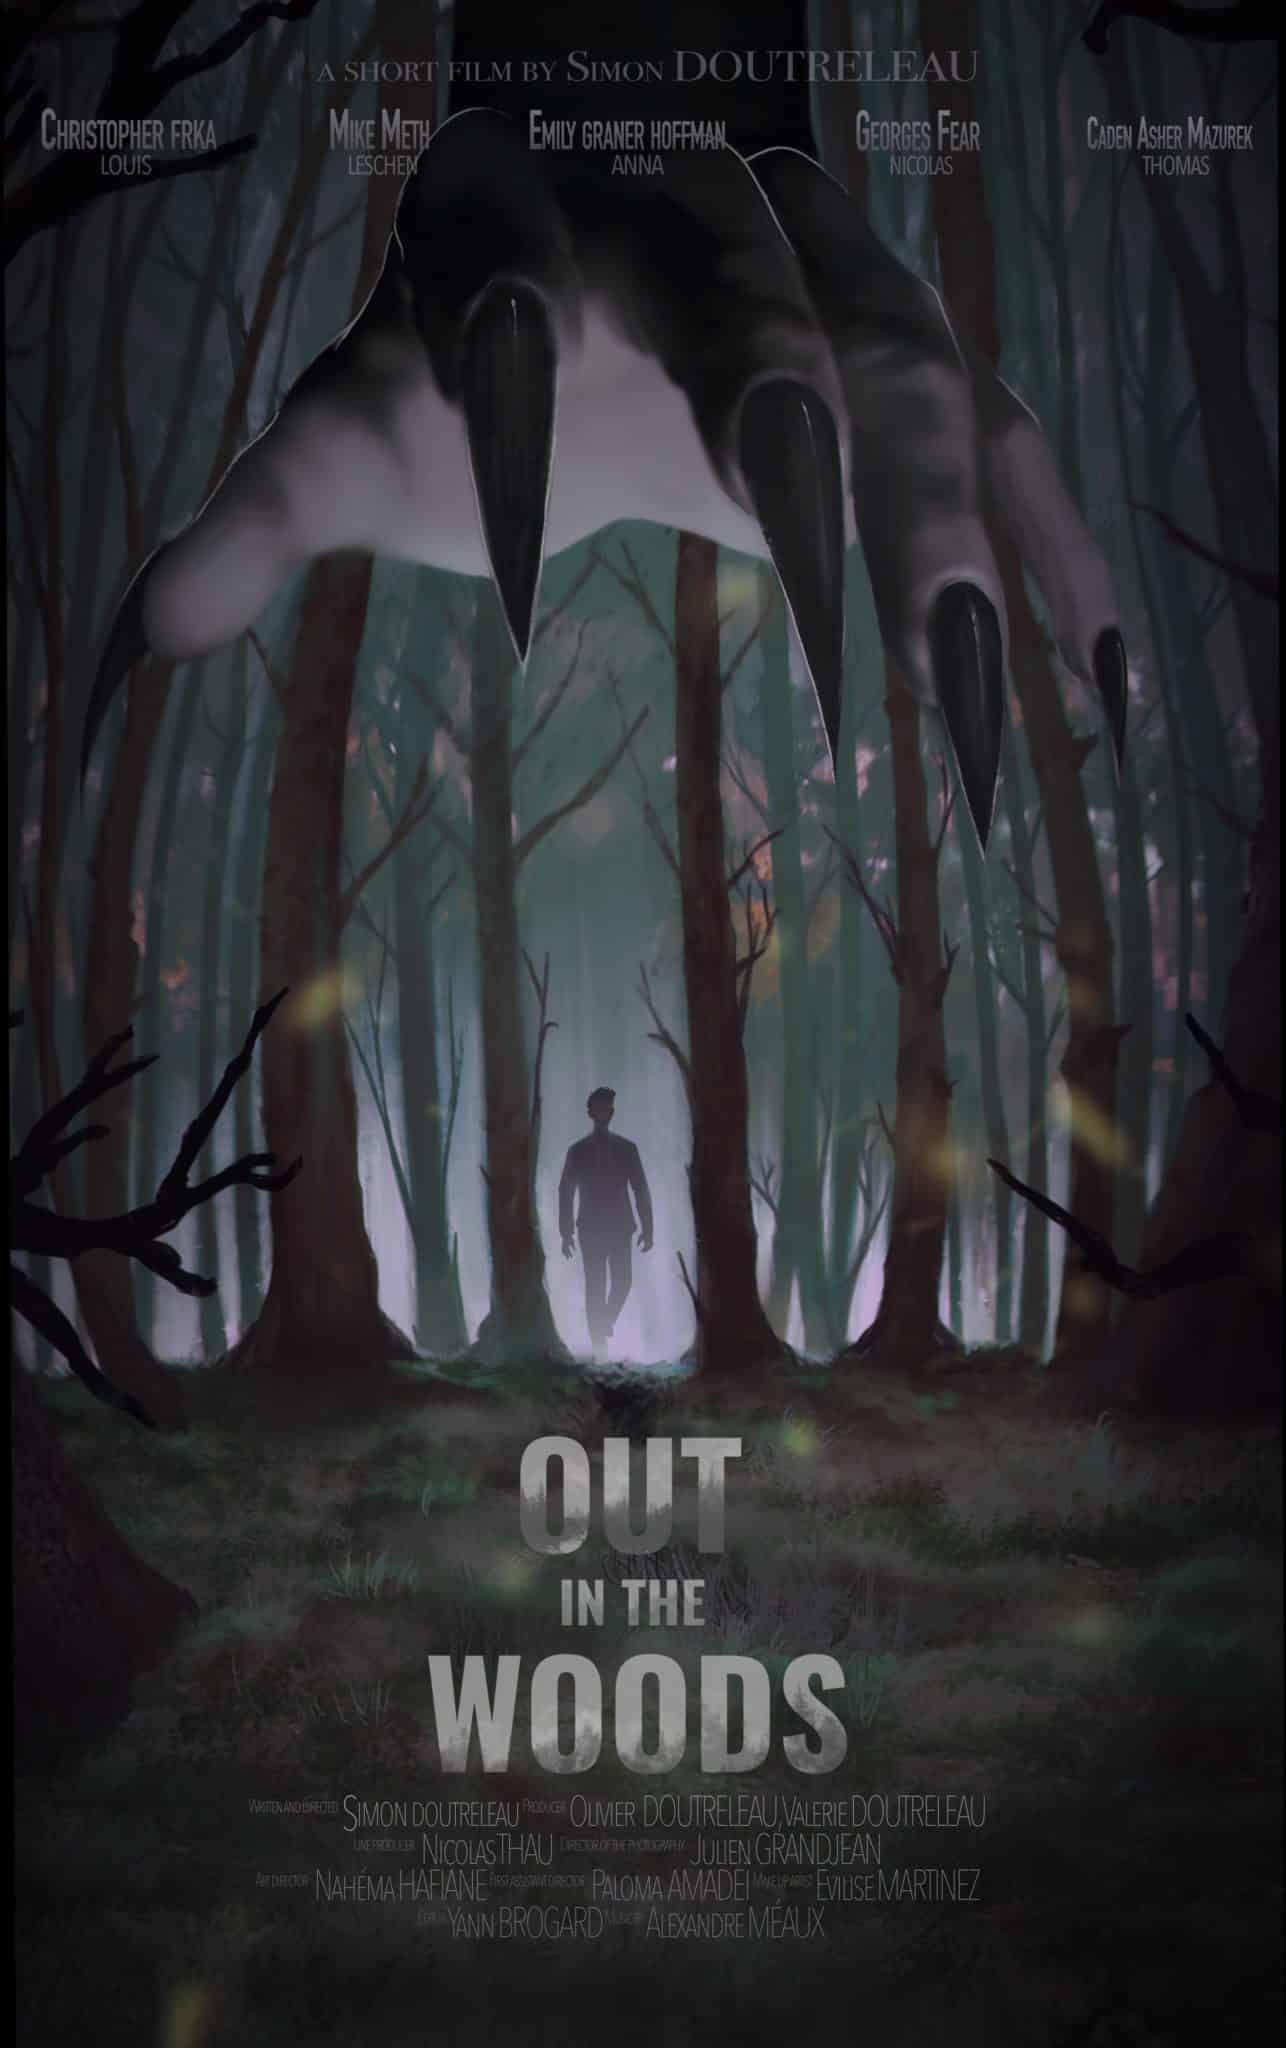 The Making of Out In The Woods